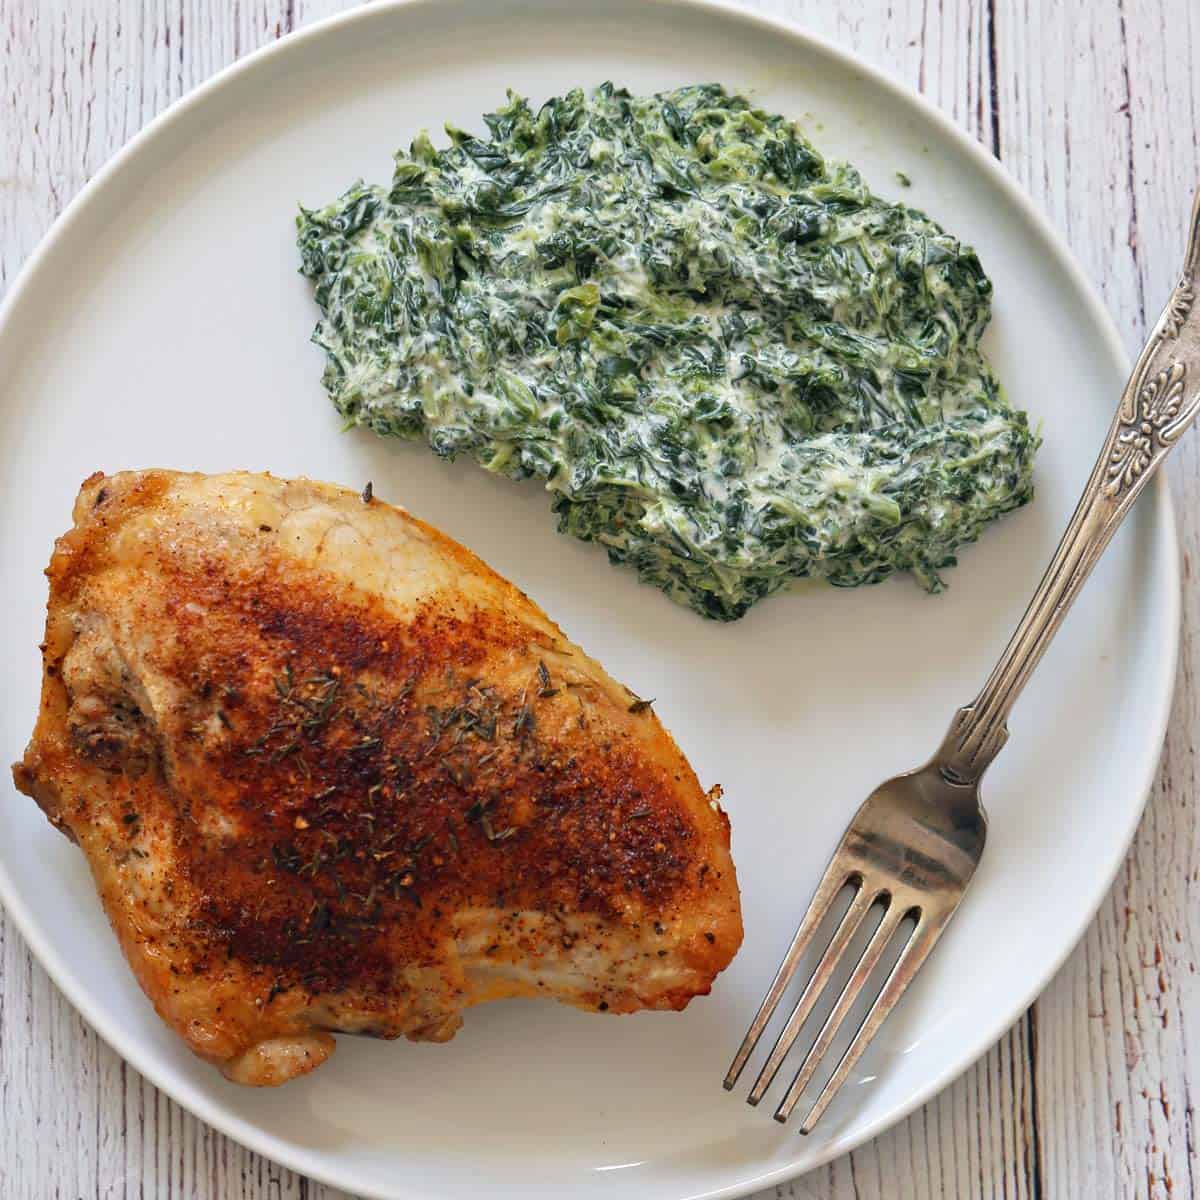 Skin-on, bone-in chicken breast is served with creamed spinach.